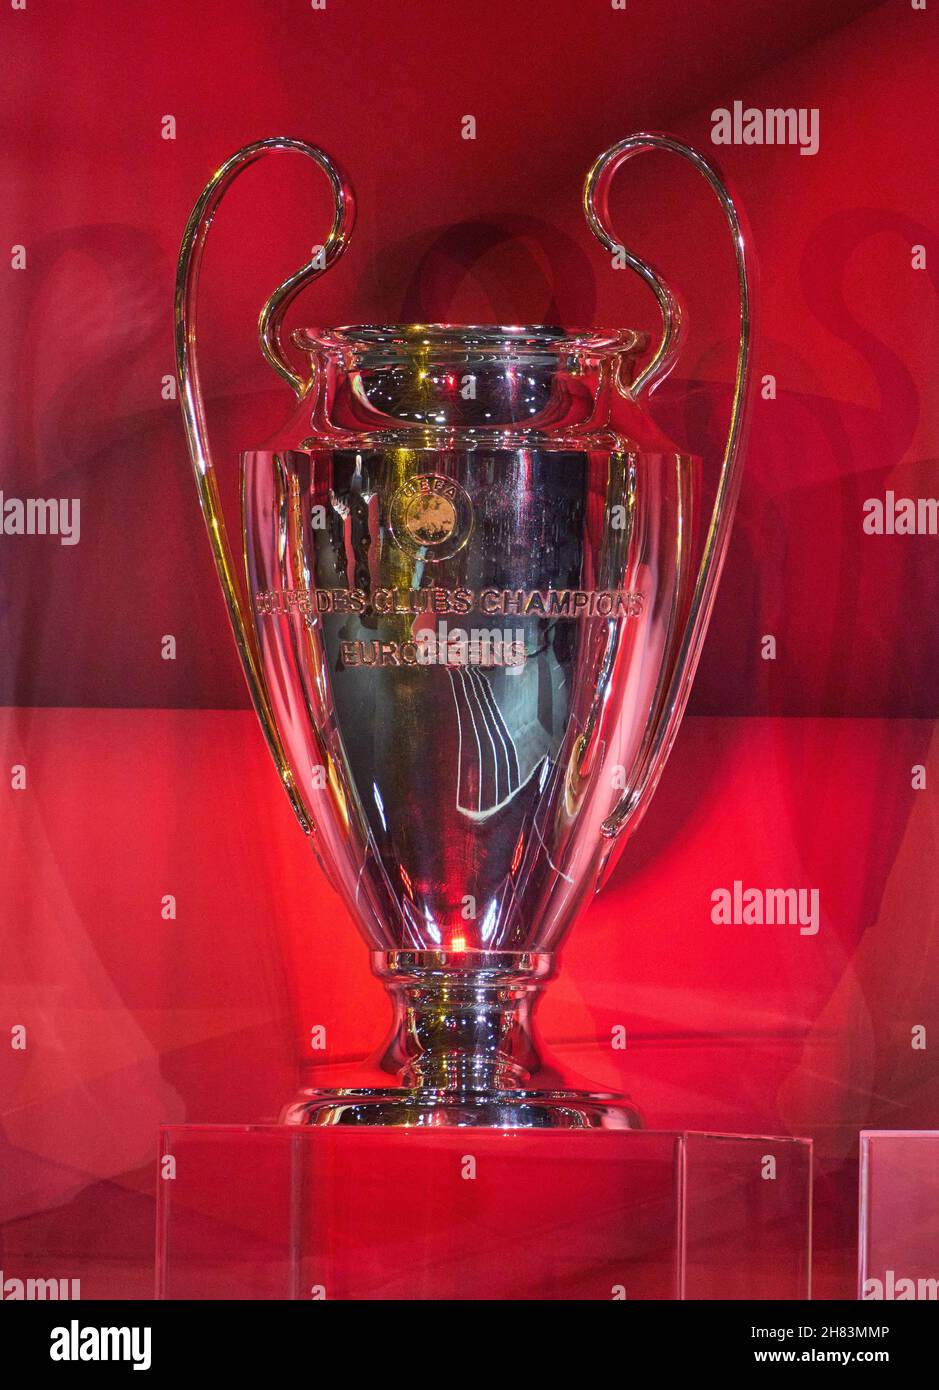 All important trophies: UEFA Champions League Pokal at the annual general  Meeting of FC BAYERN MÜNCHEN in Audi Dome Munich, November 25, 2021, Season  2021/2022, © Peter Schatz / Alamy Live News Stock Photo - Alamy